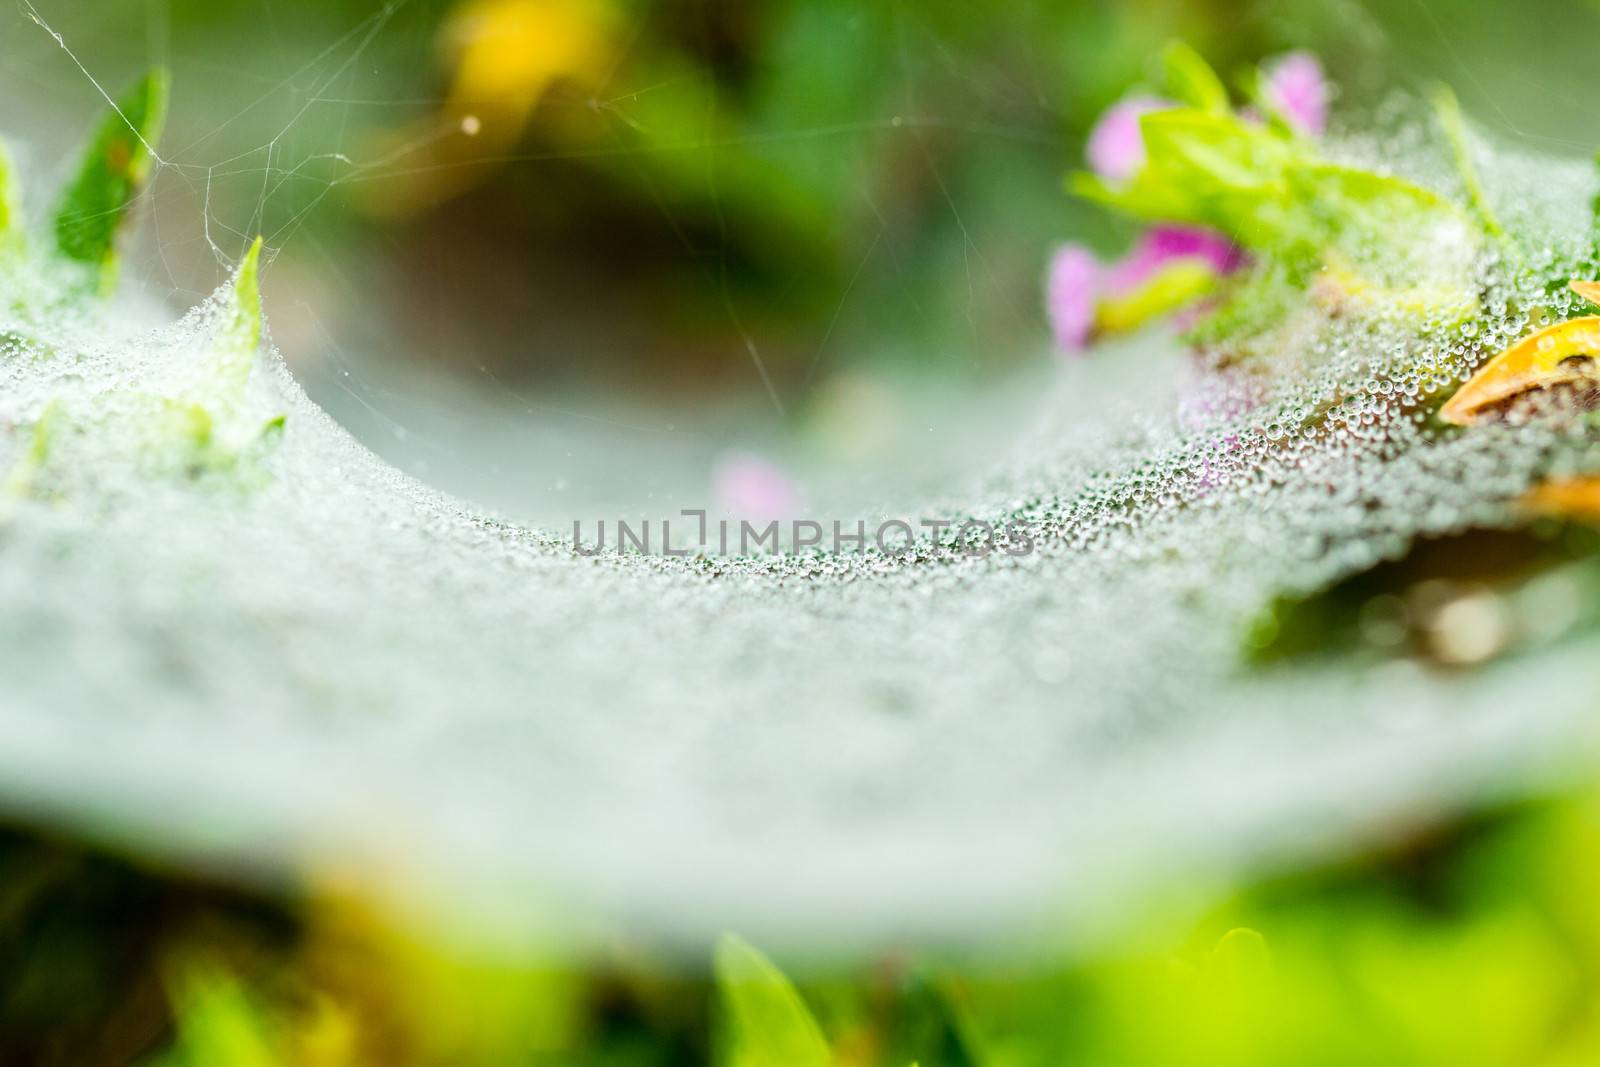 dewdrop condensation on spider web in the morning